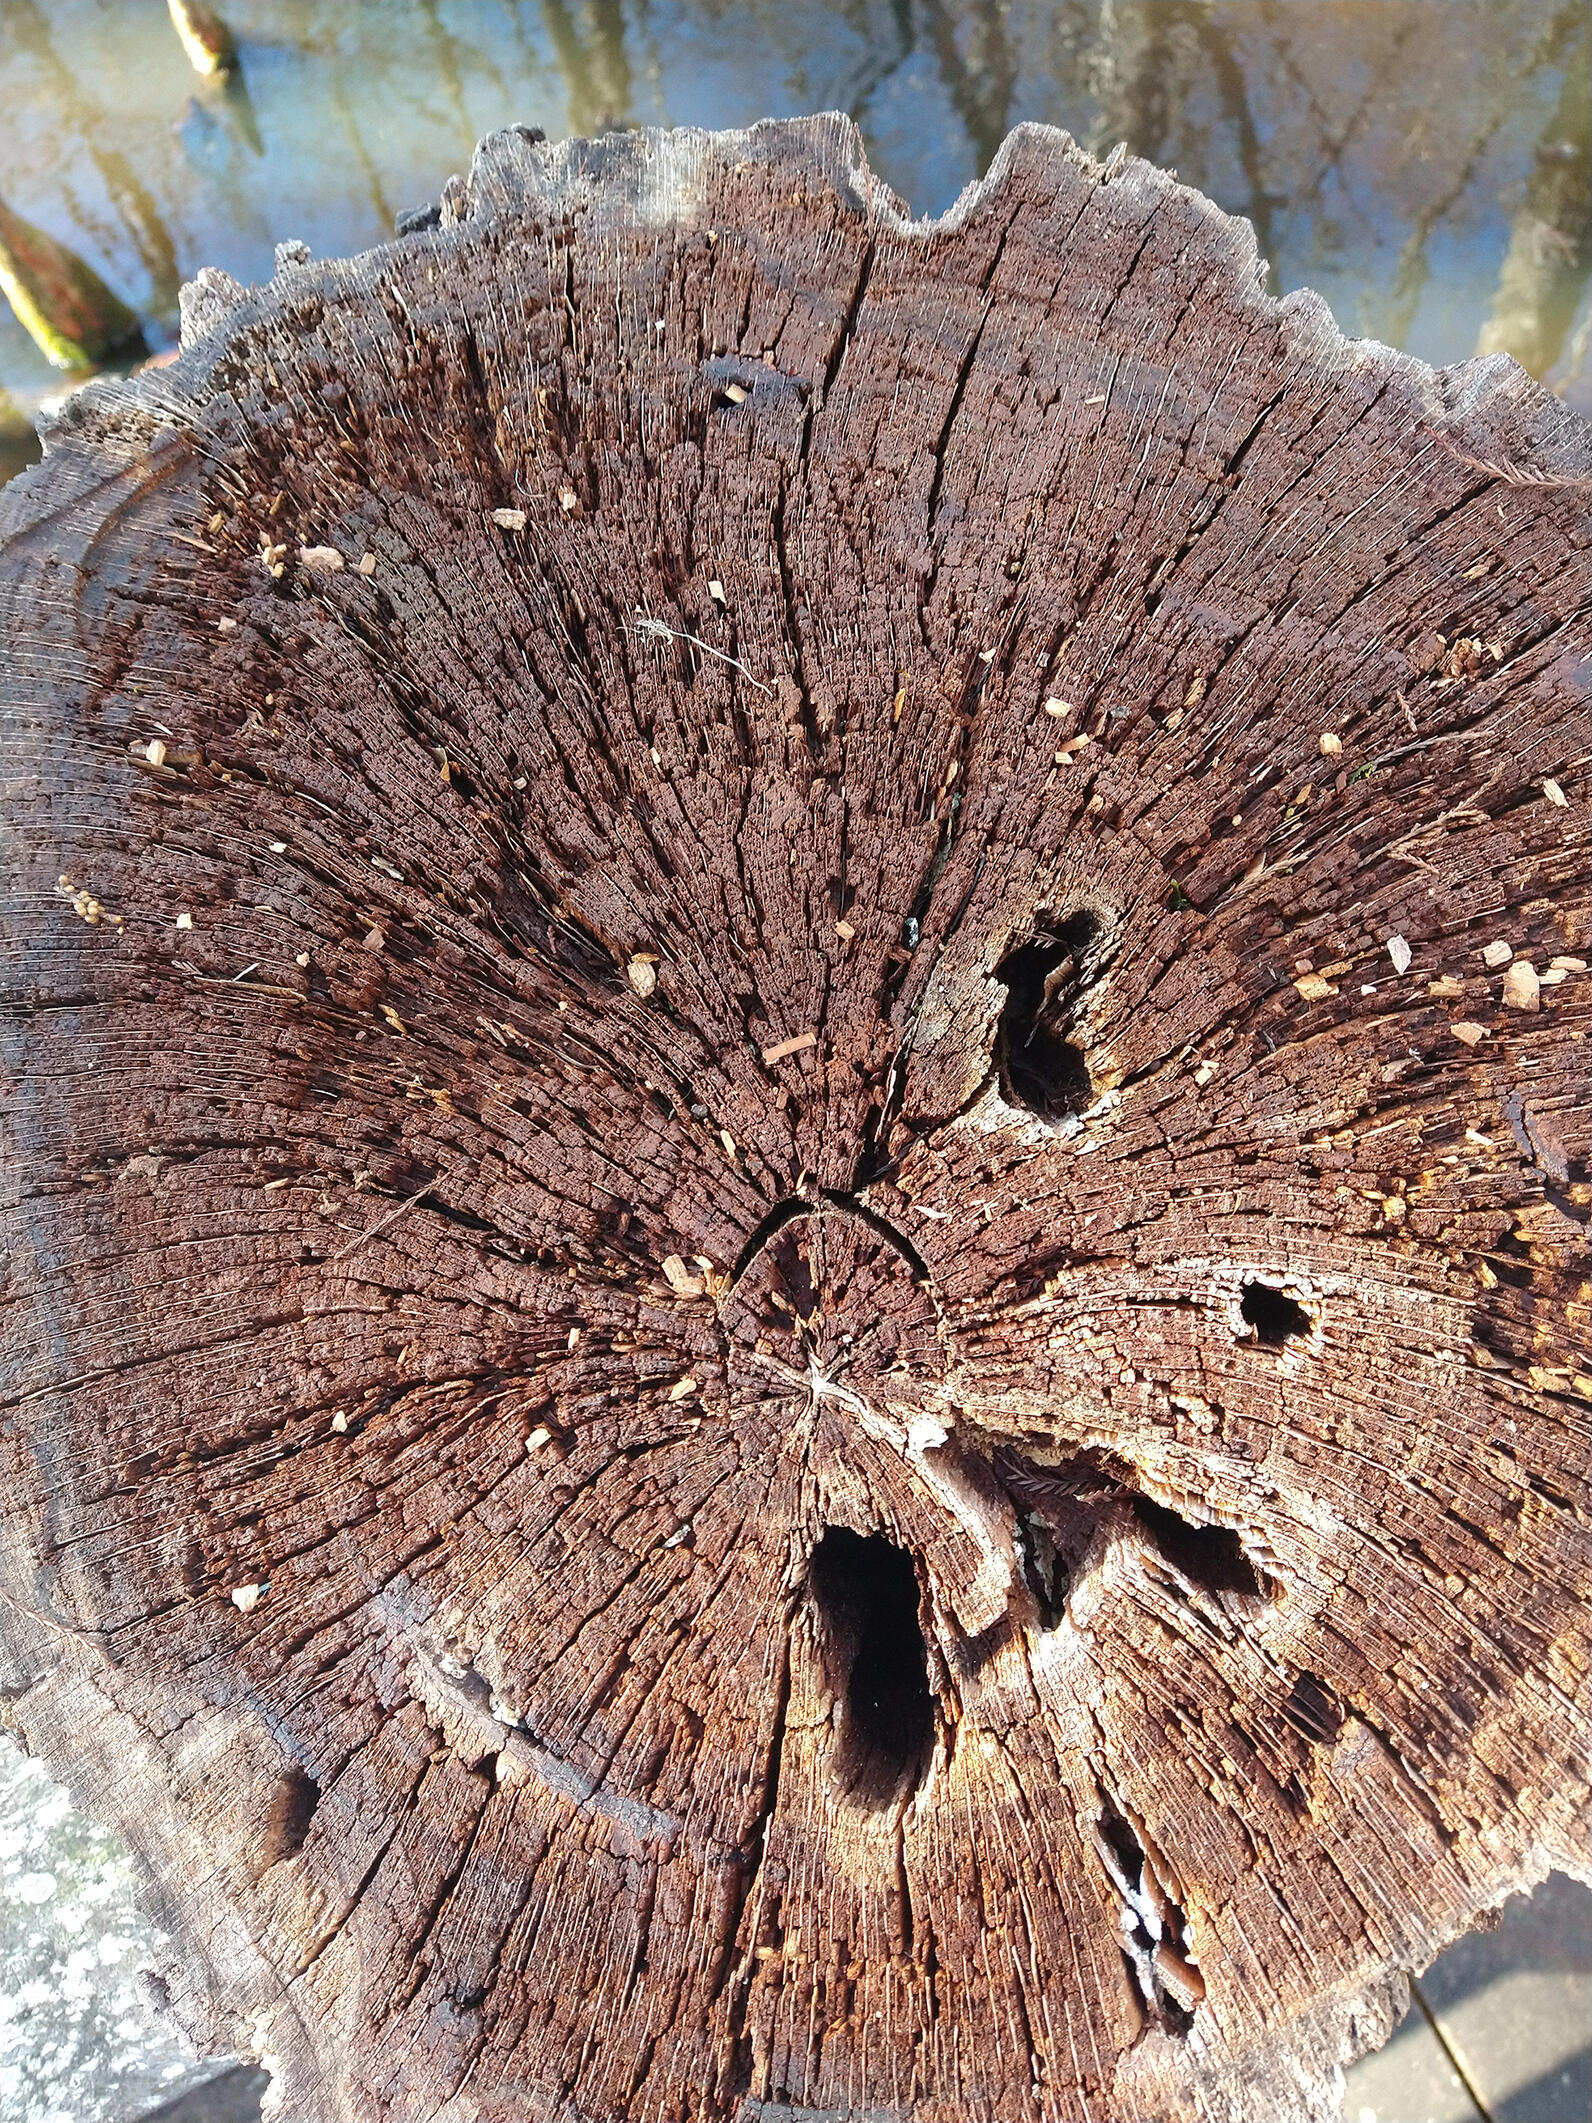 The flat cut of a tree is ringed with tiny cracks circling round and round but all pointing towards the center. There are some larger holes made by a fungus called pecky rot, large enough to stick your finger into but I’m not sure if you'd want to.